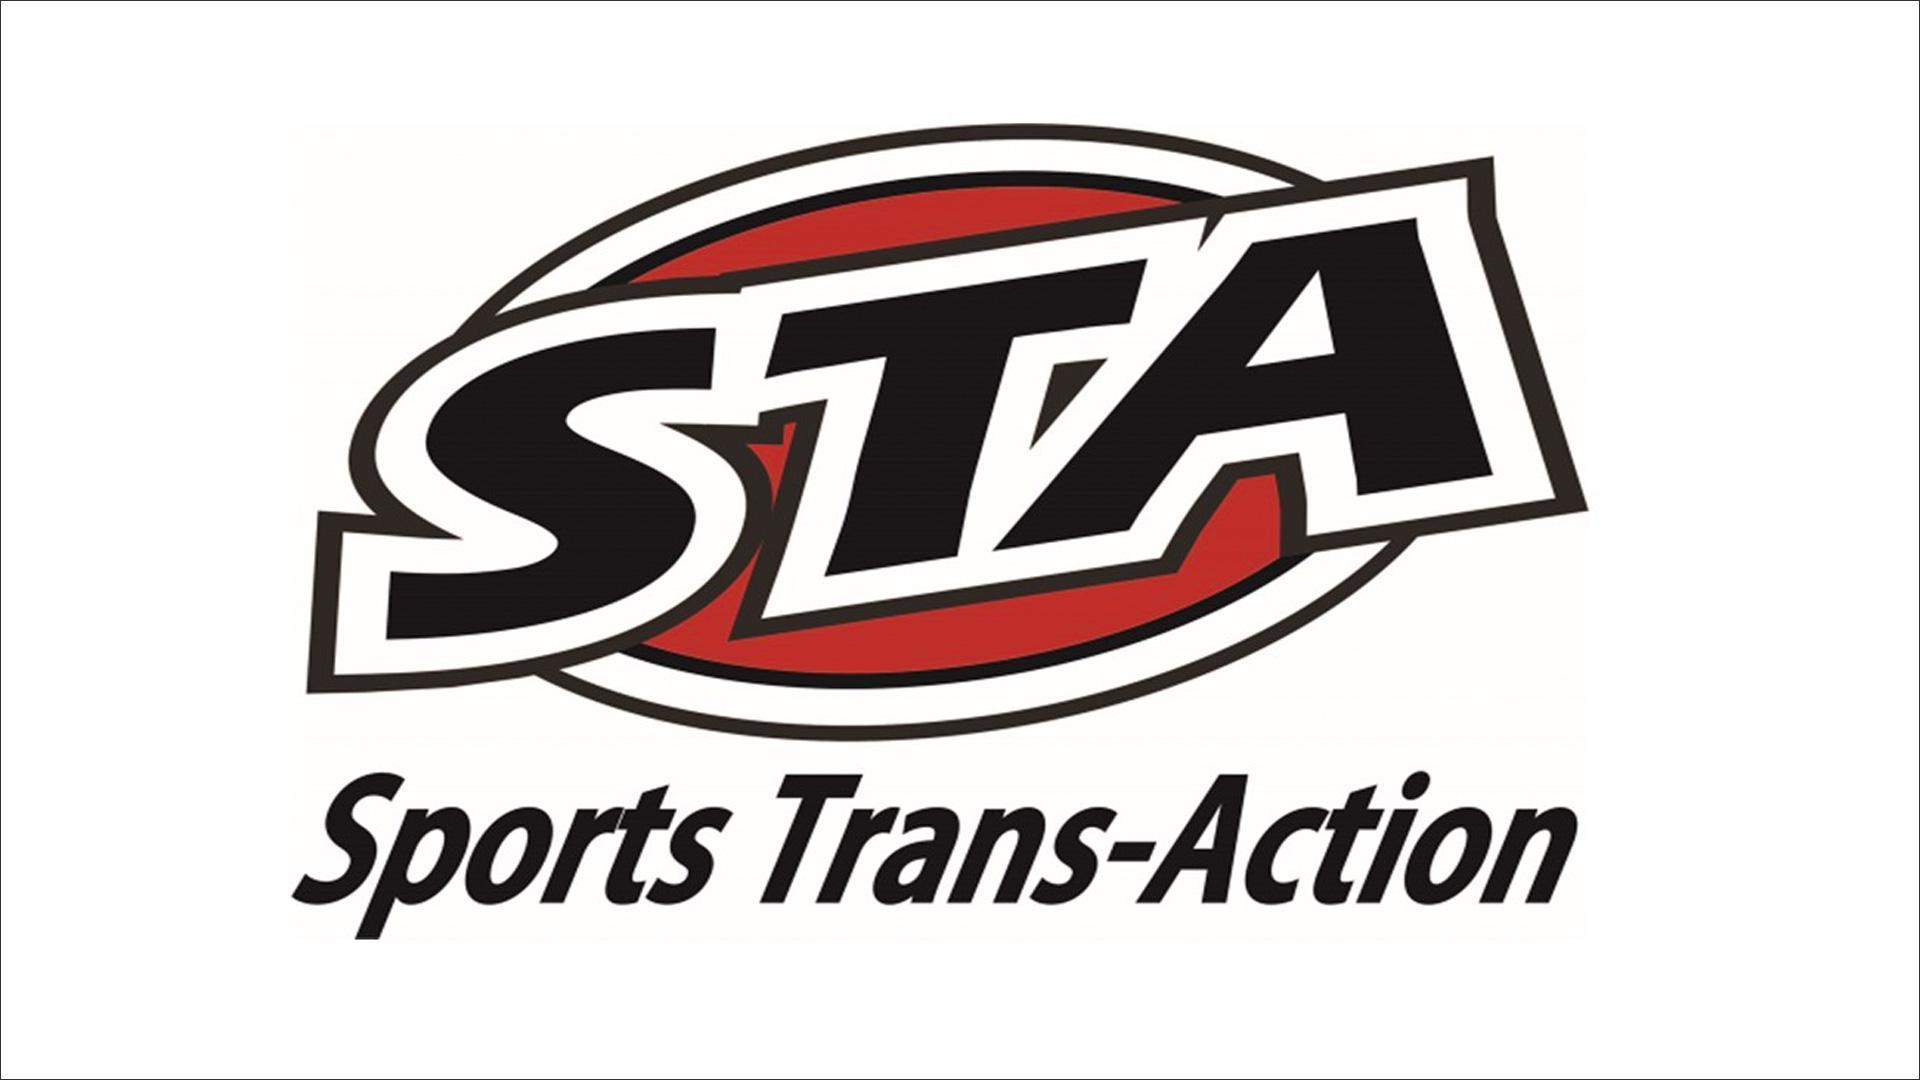 Sports Trans-Action